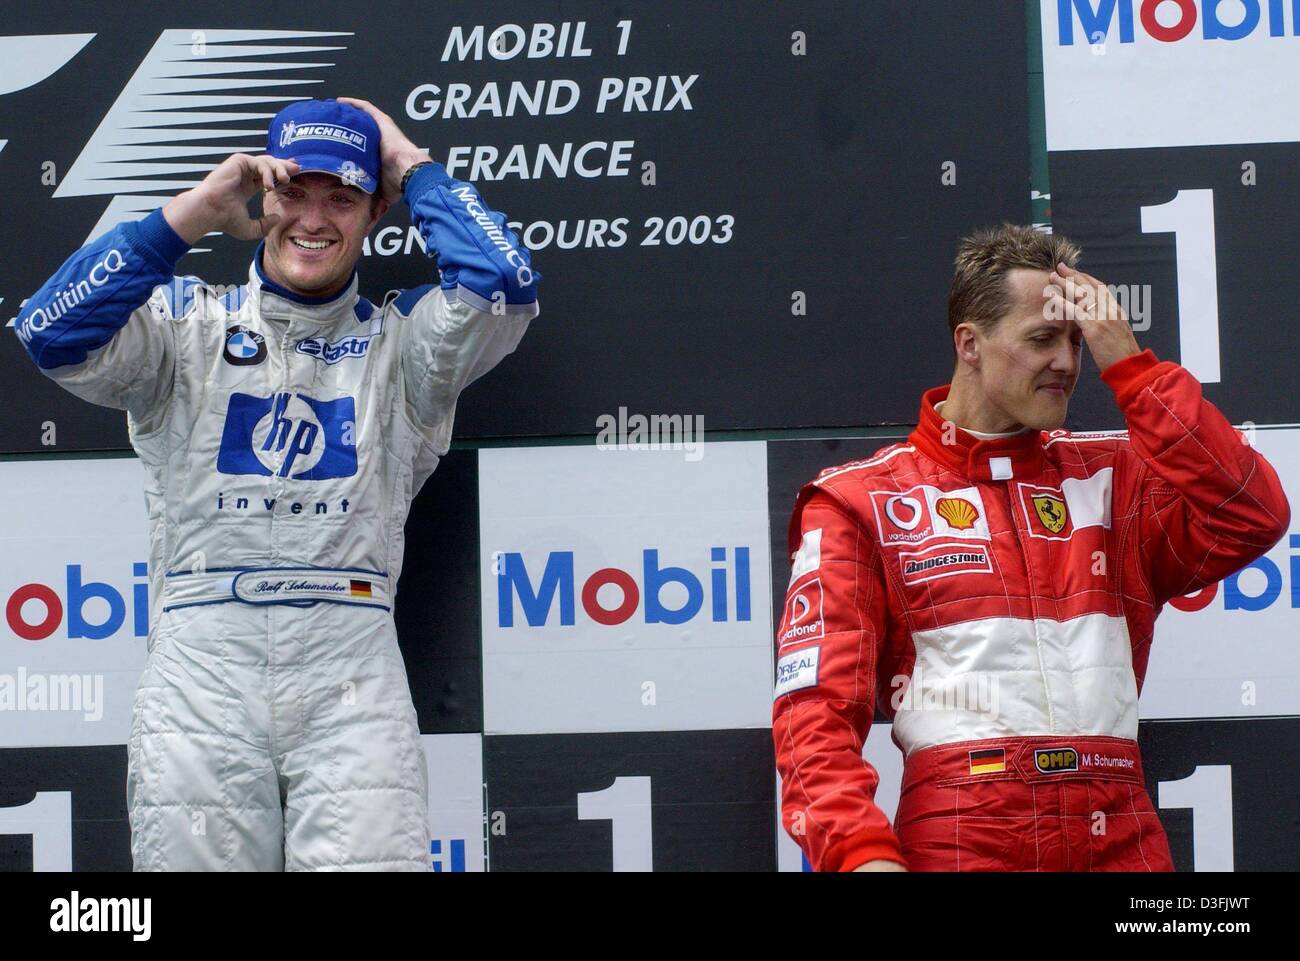 (dpa) - German formula one pilot Ralf Schumacher (L, BMW Williams) smiles after a shower of champagne while his brother, formula one driver Michael Schumacher (Ferrari), looks thoughtful after the French formula one Grand Prix in Magny-Cours, France, 6 July 2003. Ralf Schumacher finished first, his brother third. Stock Photo